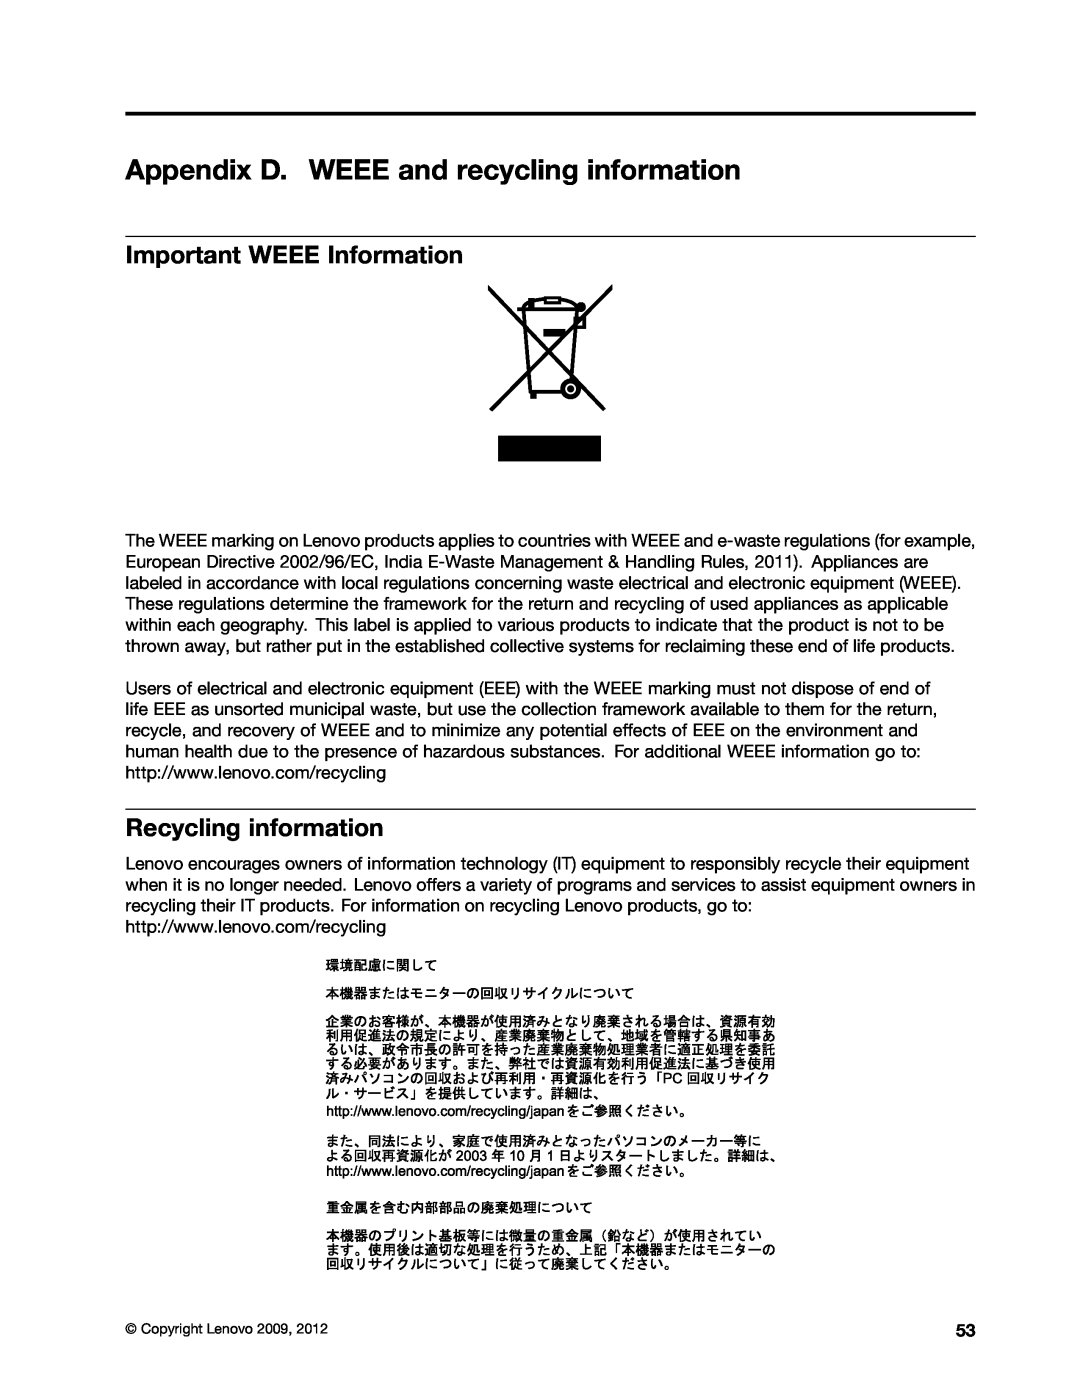 Lenovo 4217, 4157, 4105 manual Appendix D. WEEE and recycling information, Important WEEE Information, Recycling information 